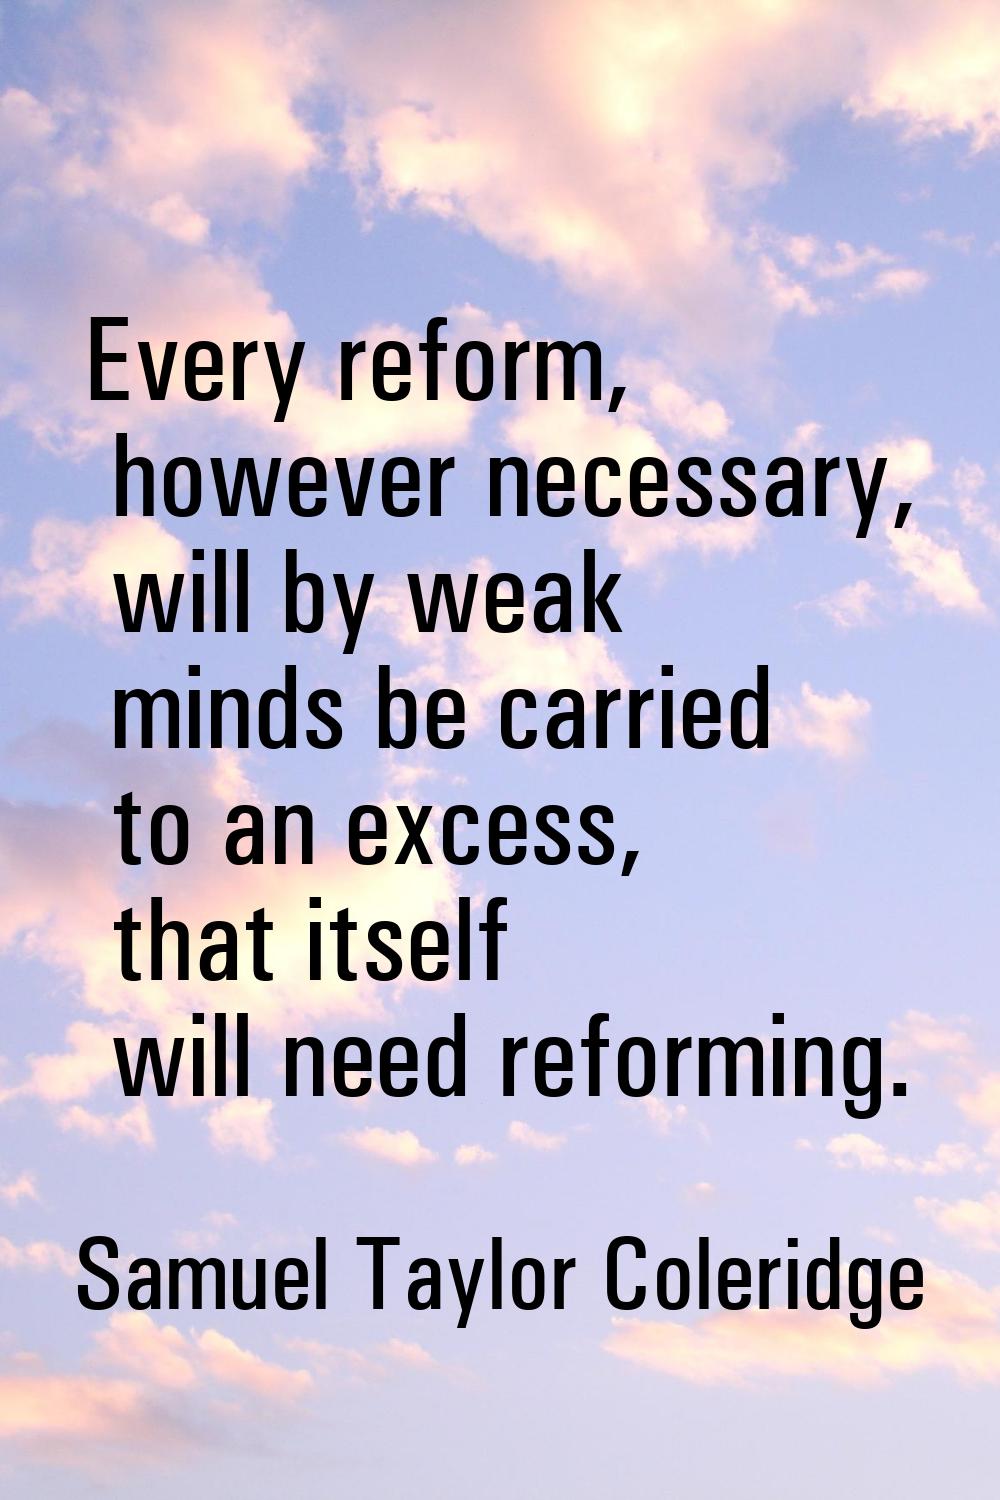 Every reform, however necessary, will by weak minds be carried to an excess, that itself will need 